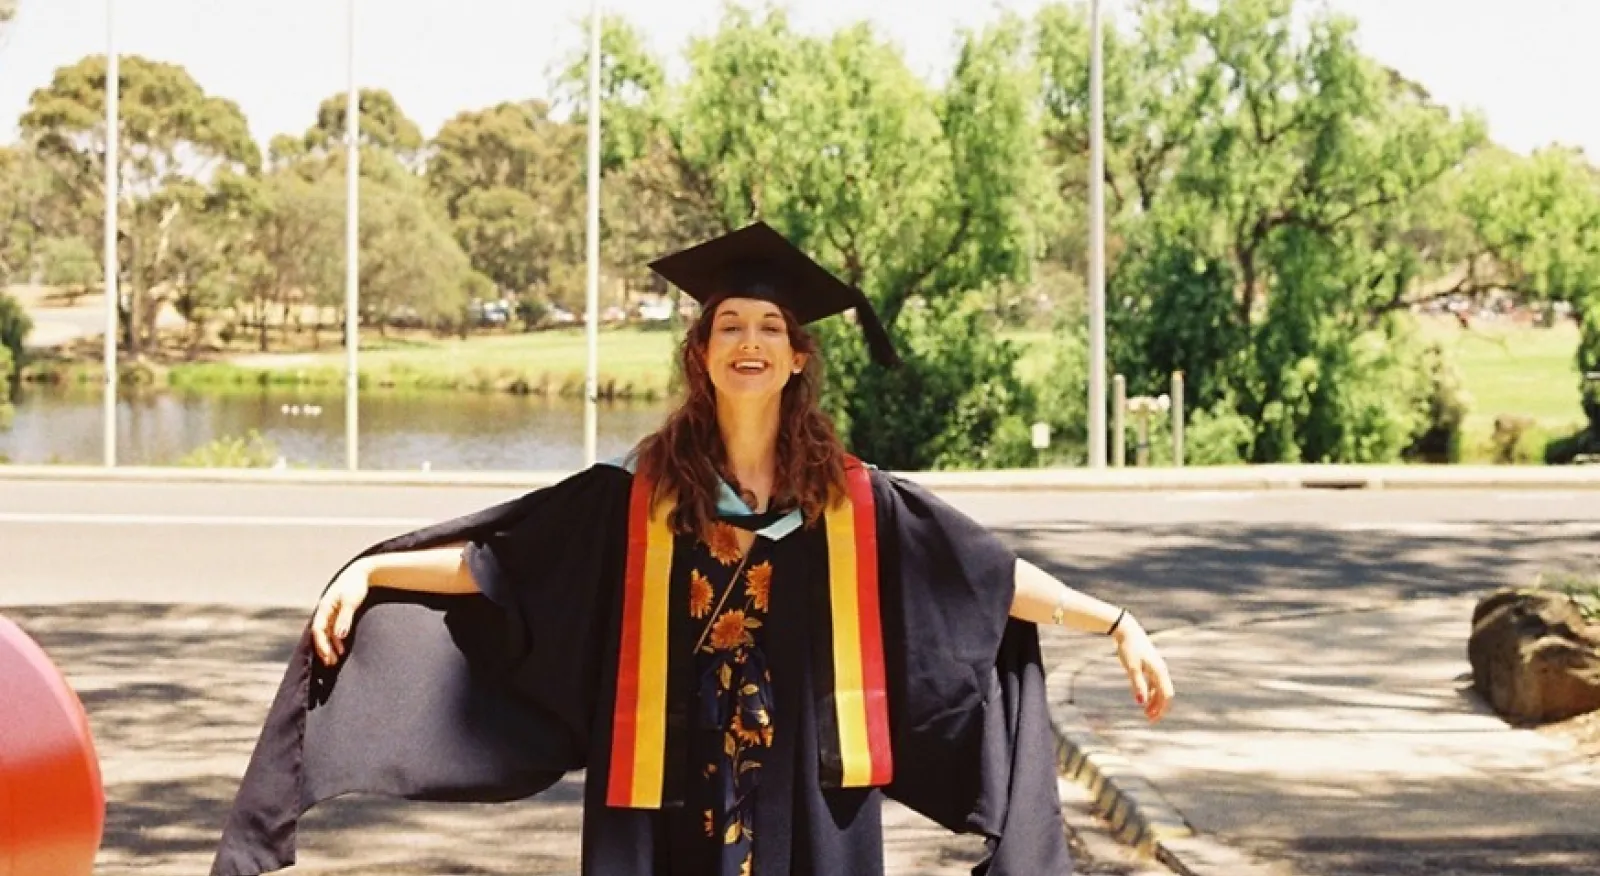 A woman in a graduation gown and cap proudly stands in front of a riverbank flanked with trees. She is smiling and holding her arms out.